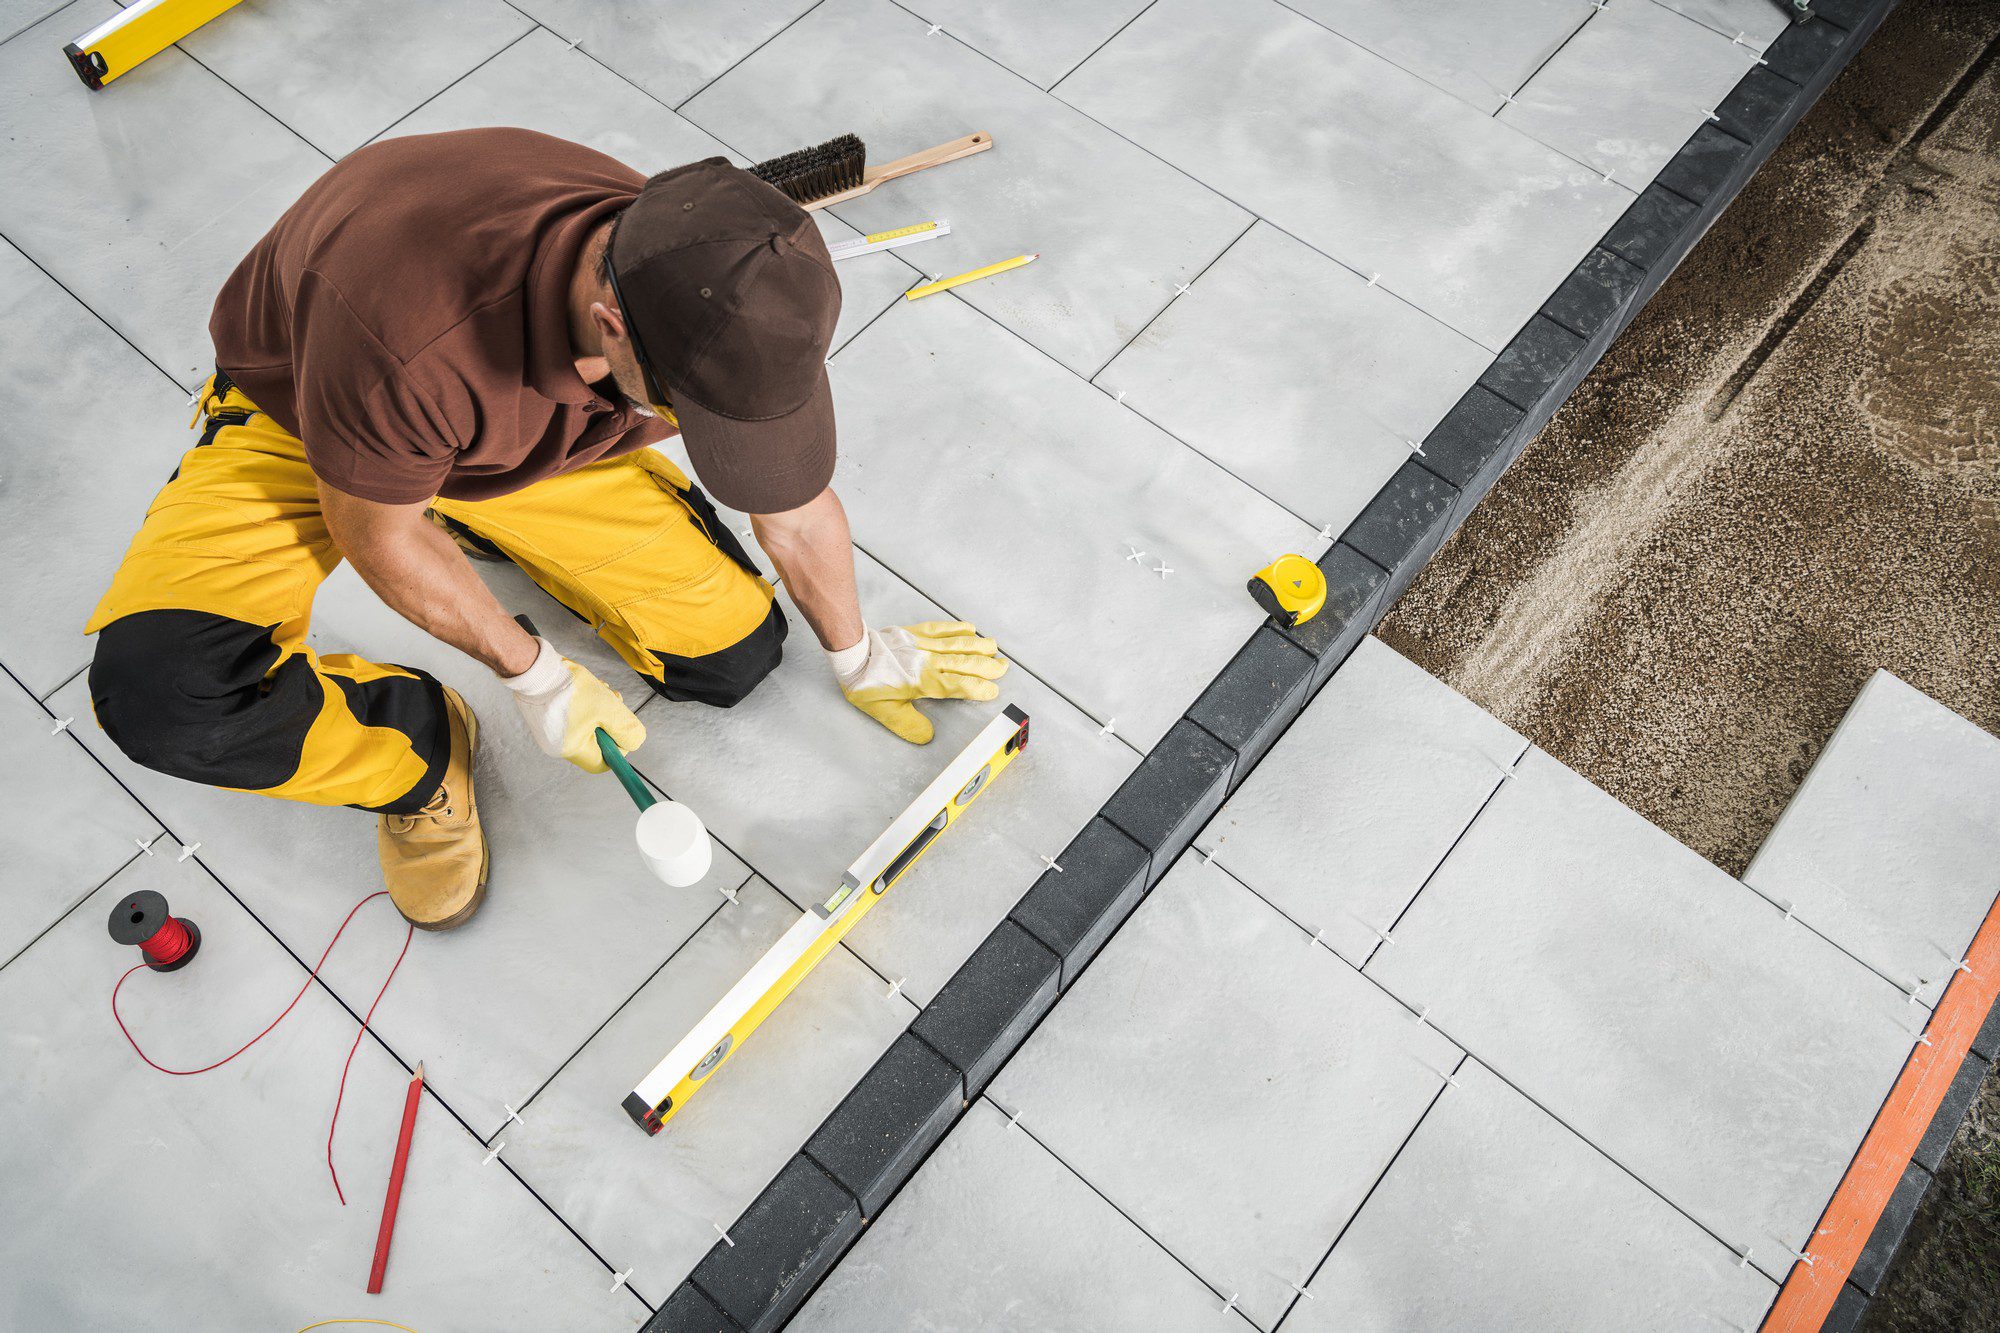 This image shows a person engaged in construction or home improvement work, specifically installing floor tiles. The individual is dressed in work clothes (a brown shirt, yellow work pants, safety boots, and gloves) and is using a level to ensure the tiles are laid evenly.In the scene, we see various tools and materials associated with tiling, including:1. Floor tiles: Some are already laid down, and others are awaiting installation.
2. Spacers: Small cross-shaped plastic pieces used to create even gaps between tiles, ensuring consistent grout lines.
3. Level: A yellow spirit level is being used to cheque that the tiles are flat and even.
4. Tile adhesive: A container, possibly holding adhesive or grout, used to secure the tiles.
5. Trowel: Might be used to spread adhesive on the floor.
6. Rubber mallet: It's not clearly visible but may be present to gently tap tiles into place.
7. Measuring tape: A yellow measuring tape is present on the right side of the image.
8. Electrical wire: A red electrical wire, perhaps used for powering tools, is partially visible.
9. Knee pads: The person is wearing knee pads, which offer protection and comfort while working on the floor.The work area seems to be neatly organized and methodical, showing an ongoing process of laying tiles accurately and professionally.